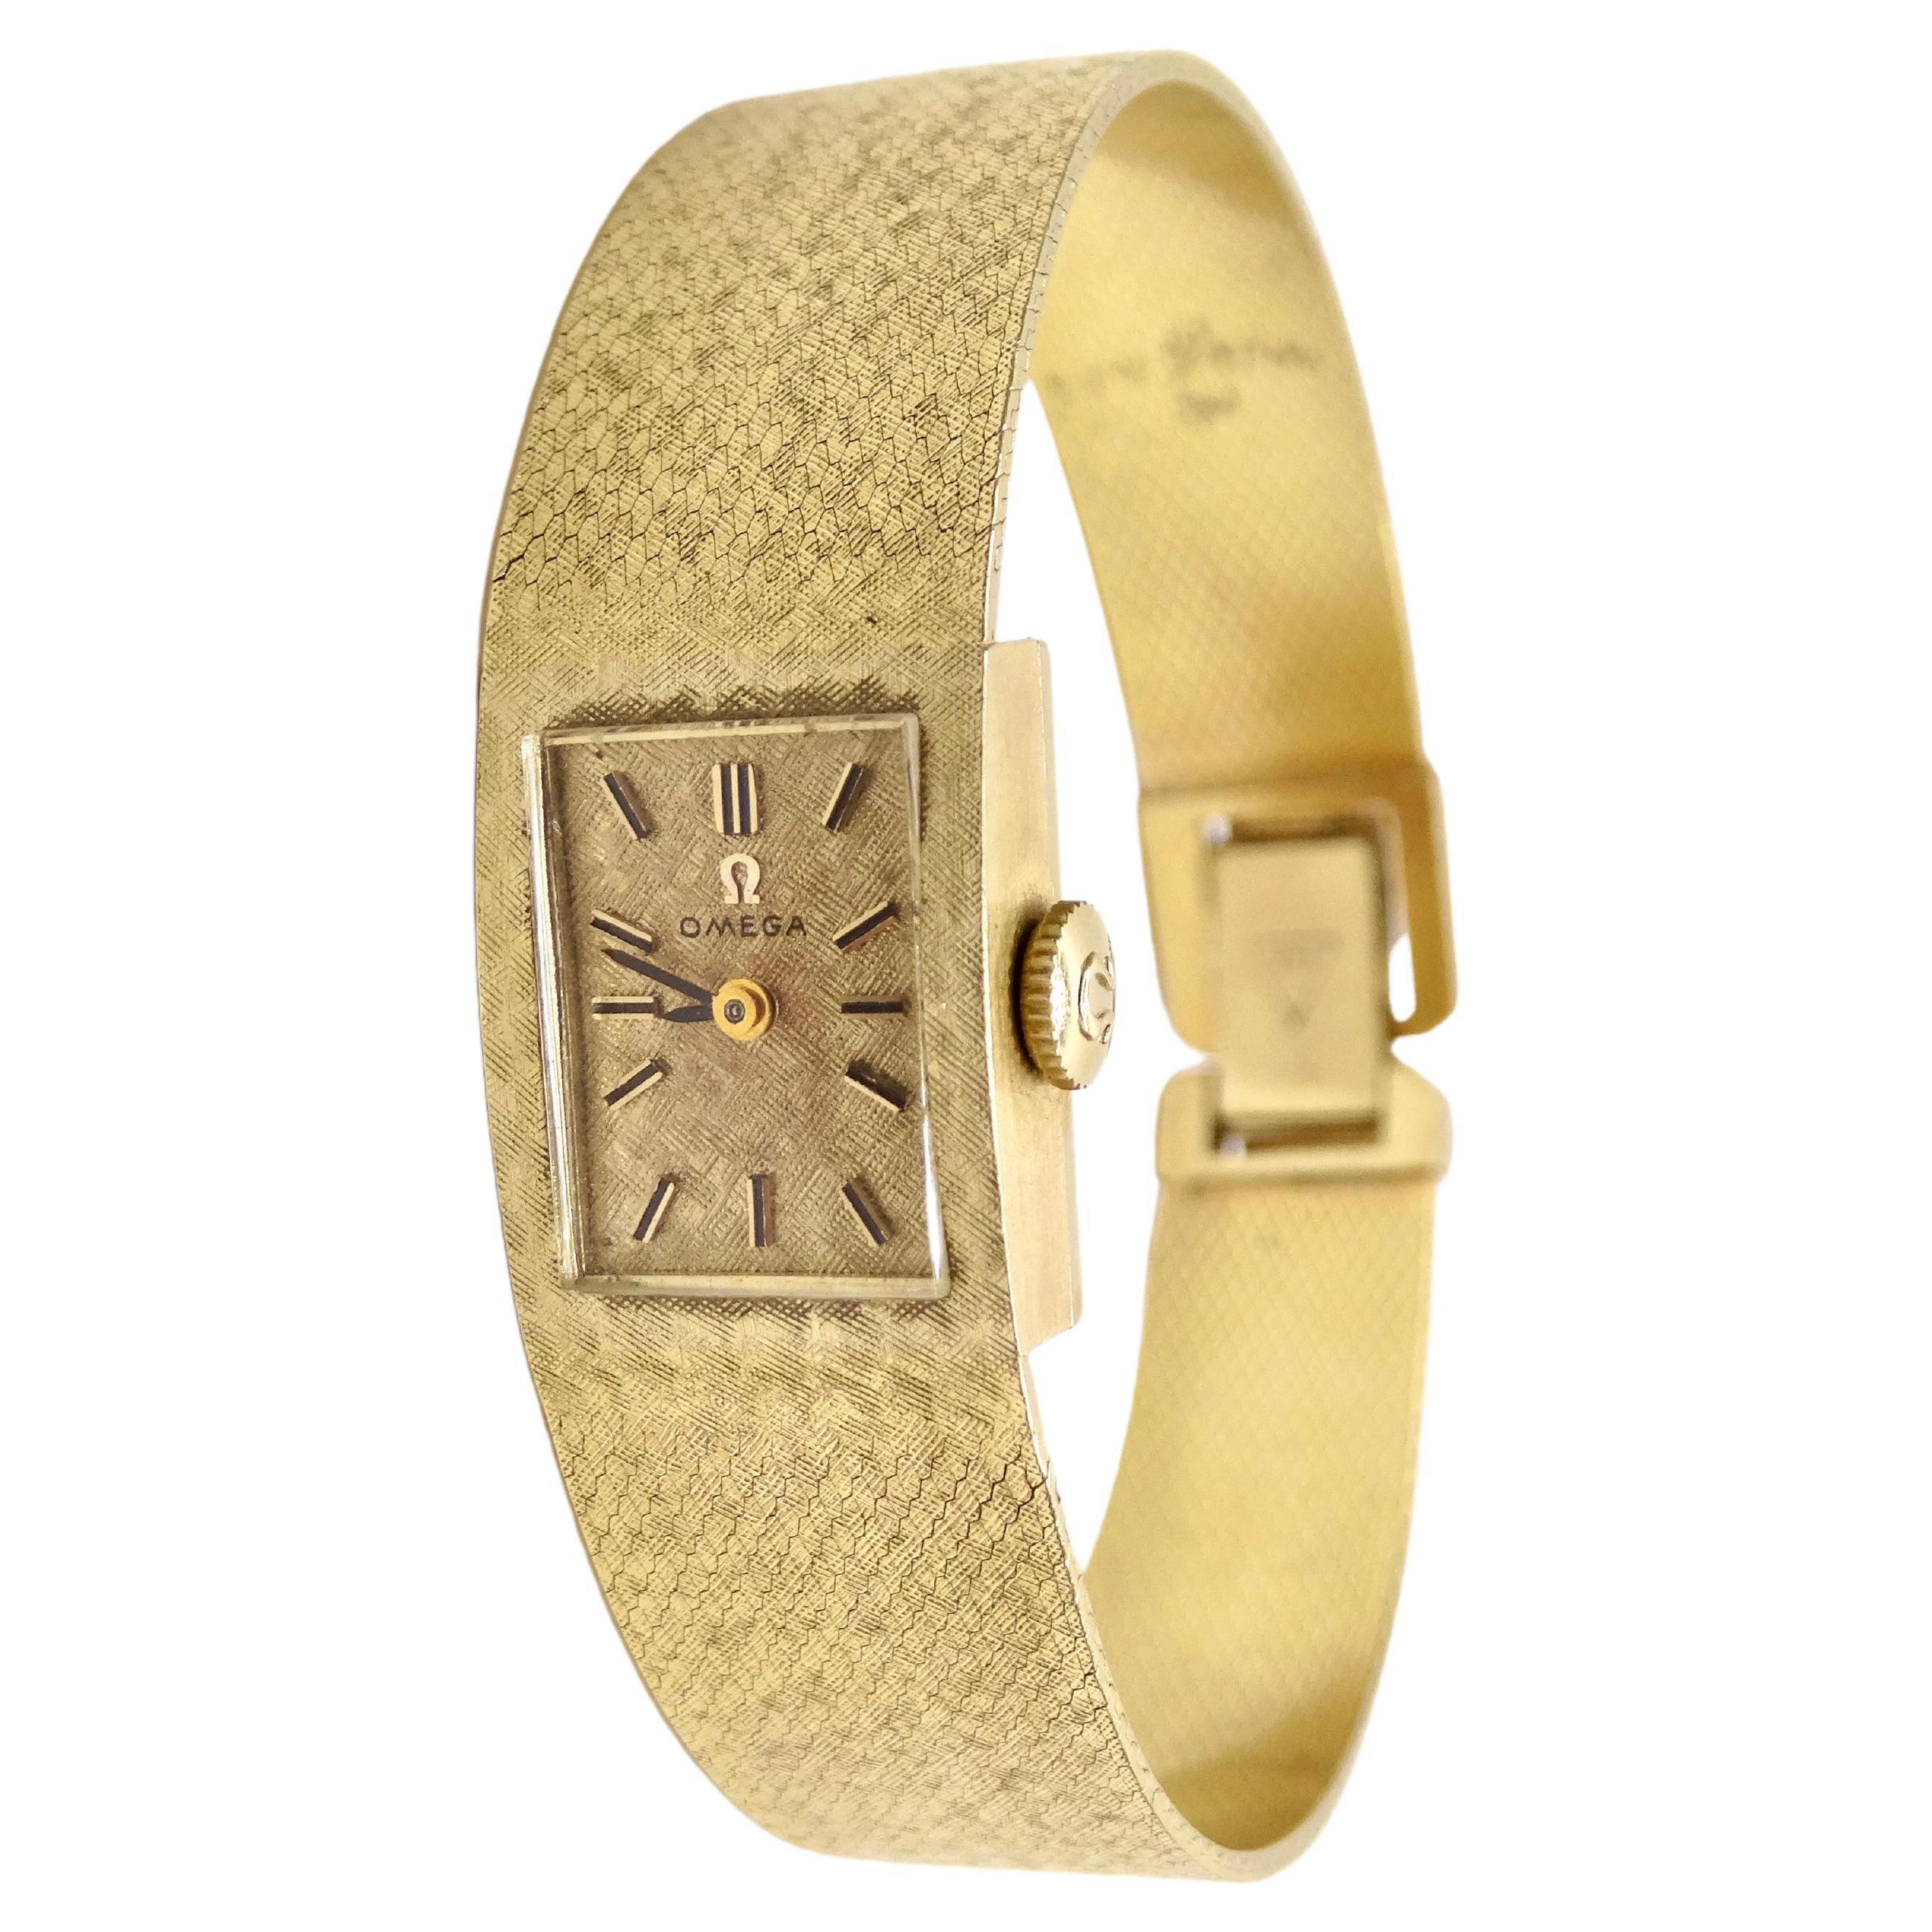 Omega Solid 14k Gold Watch For Sale at 1stDibs | omega 14k gold watch  vintage, omega 14k gold watch women's, 14k omega watch